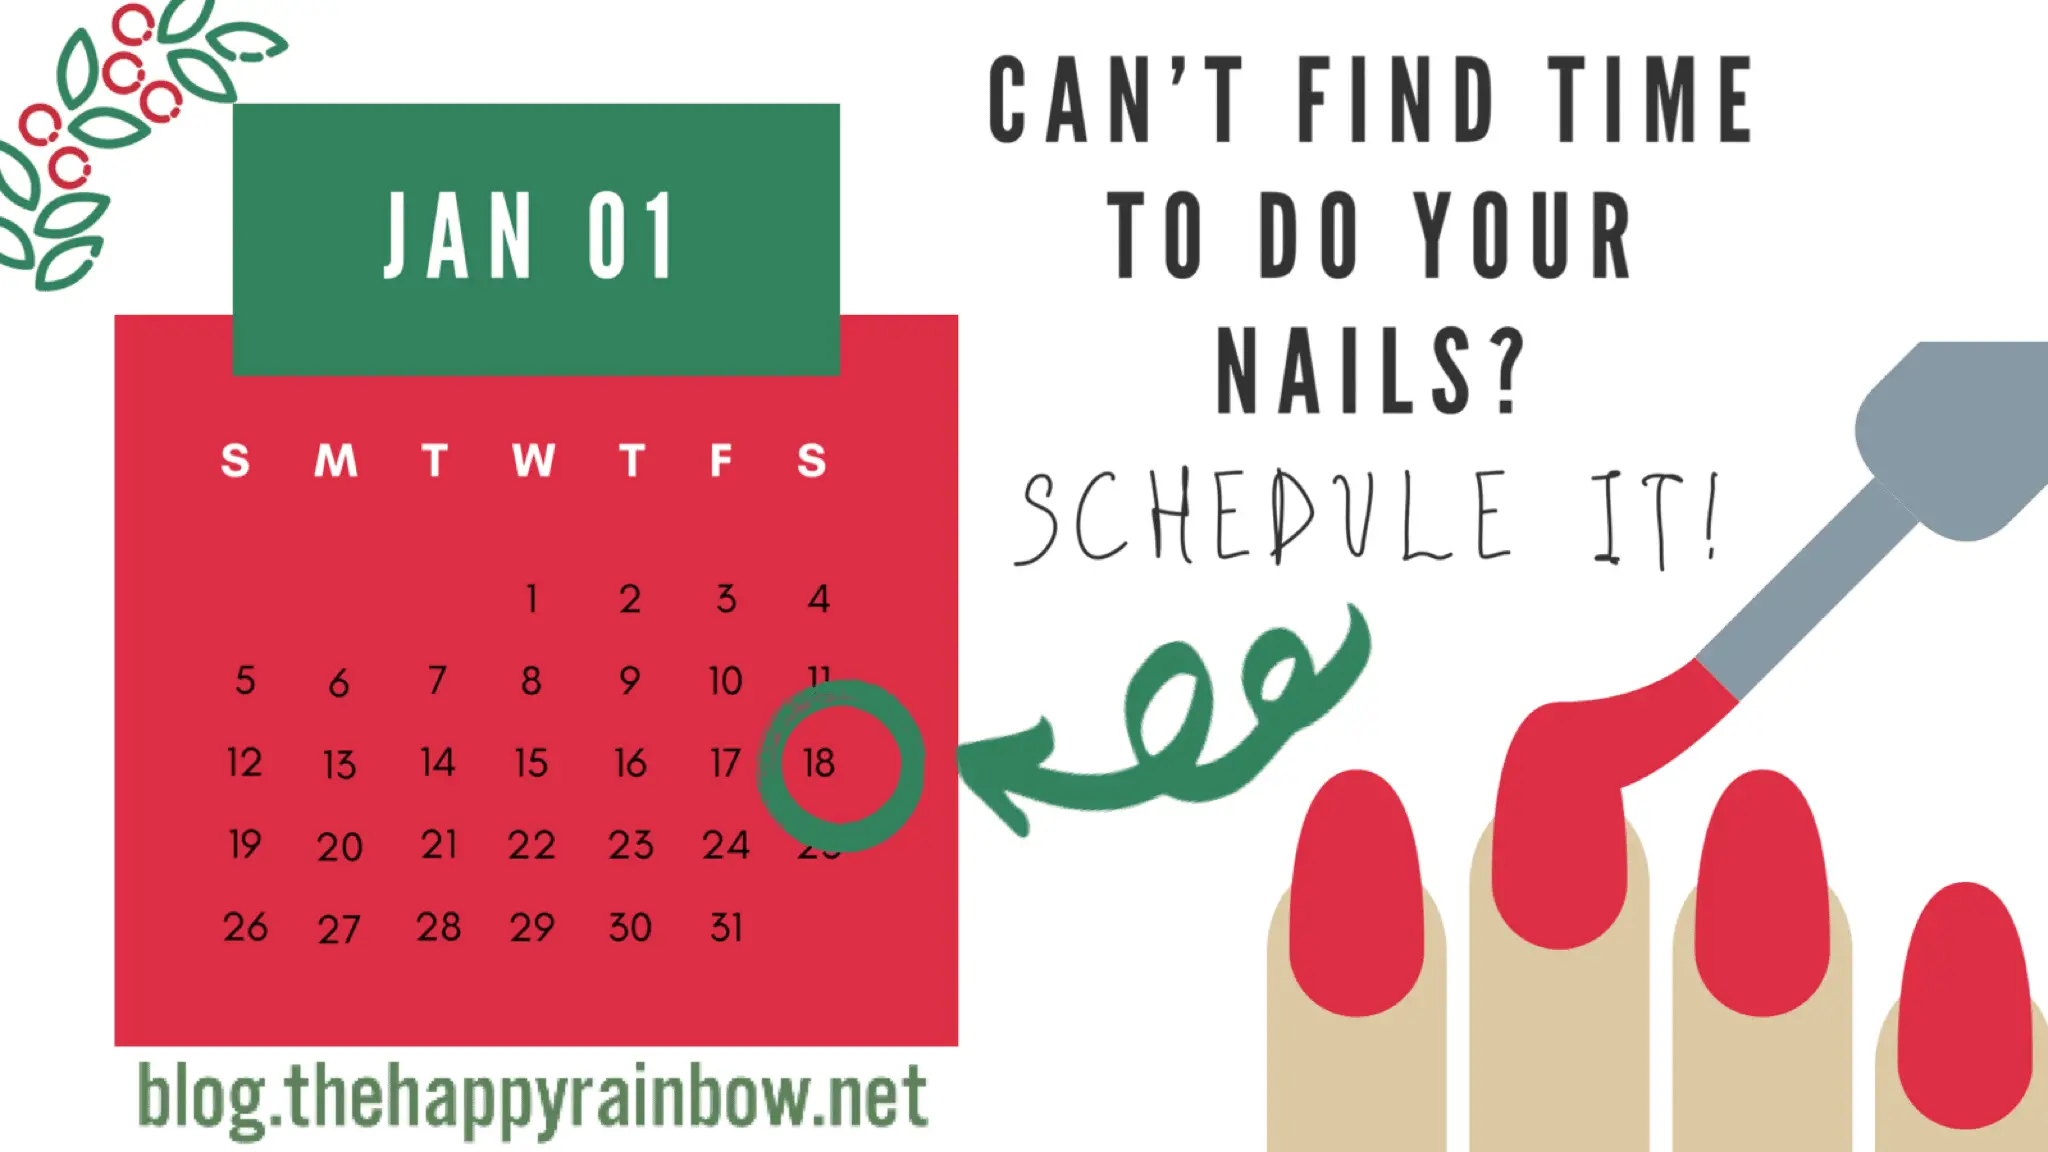 Example of how to schedule time for holiday nails.